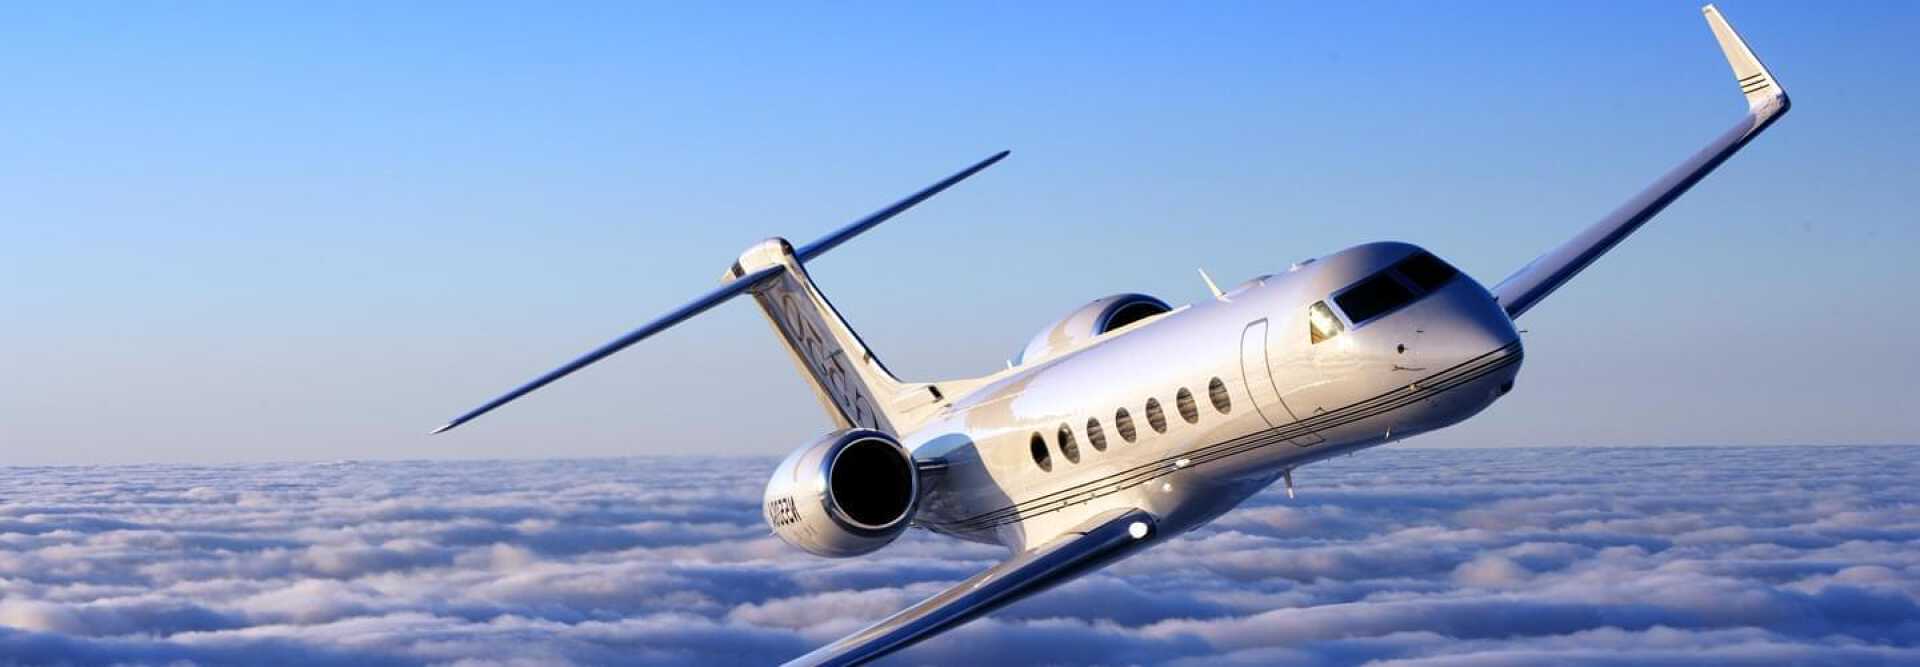 Long Range Business Jet Gulfstream G550 to charter for private aviation flights with LunaJets  for unparalleled performance and efficiency